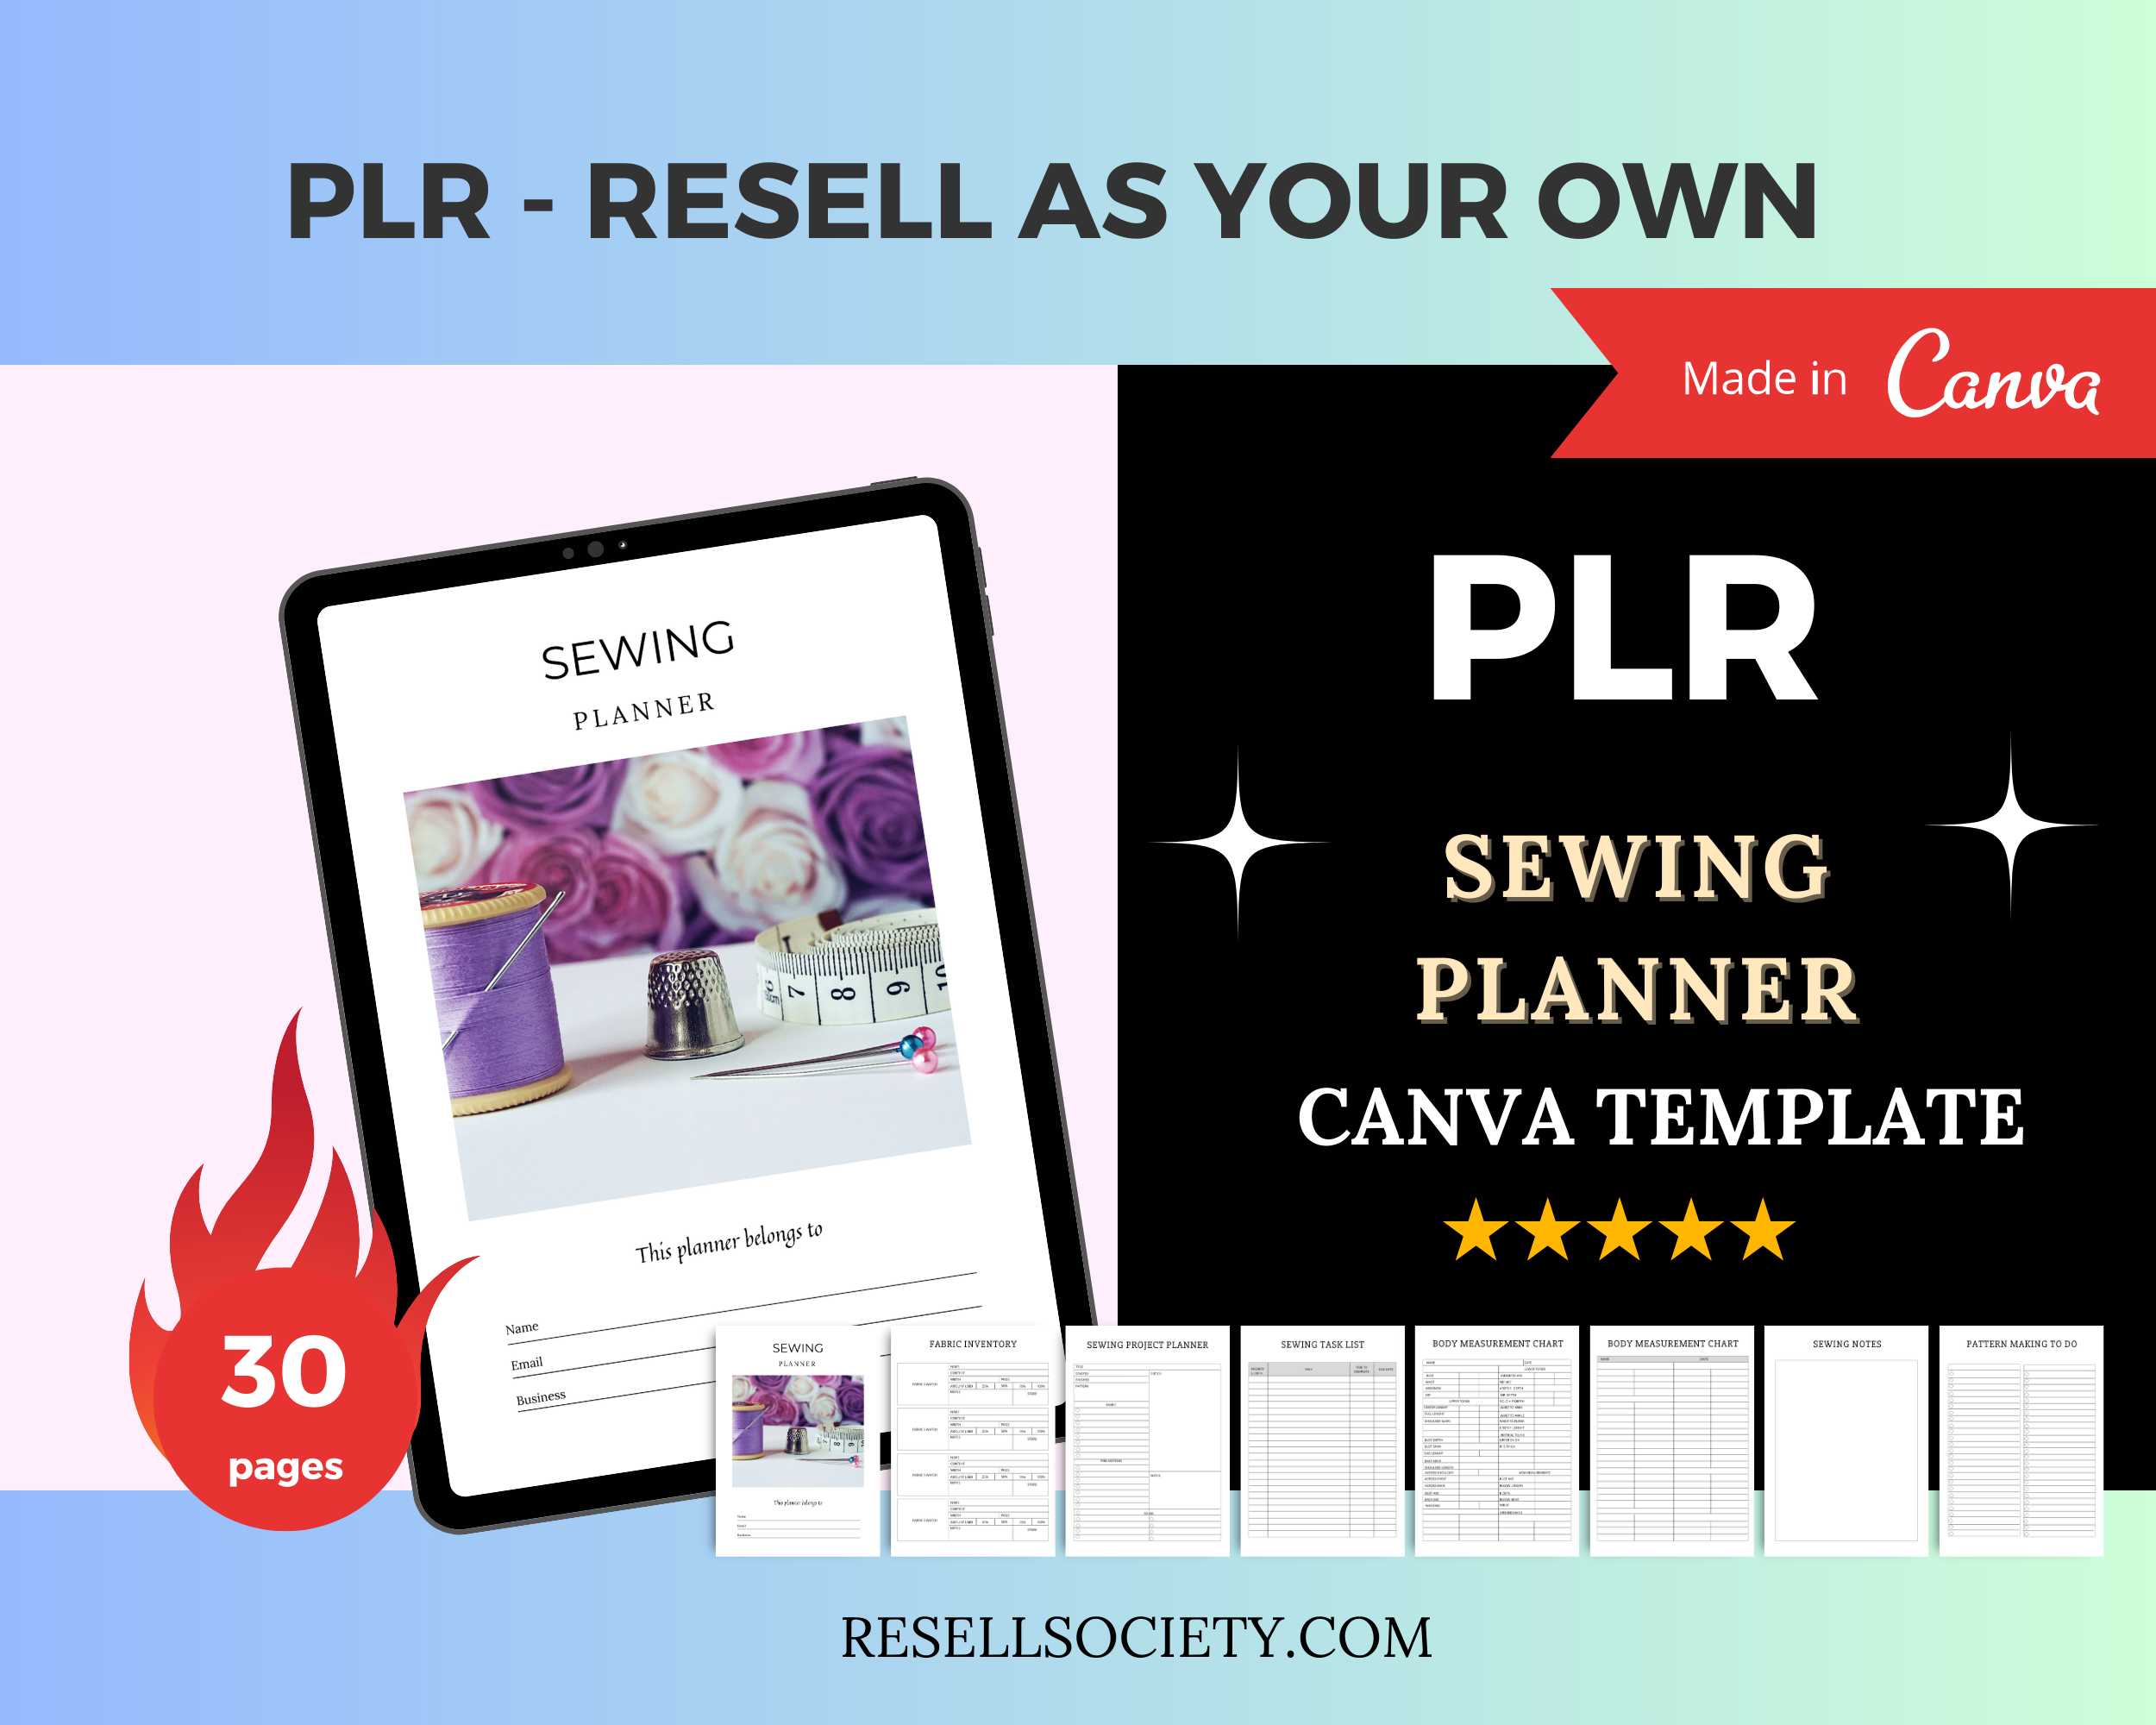 Editable Sewing Planner in Canva | Canva Template Pack | Sewing Business Planner Canva | Commercial Use